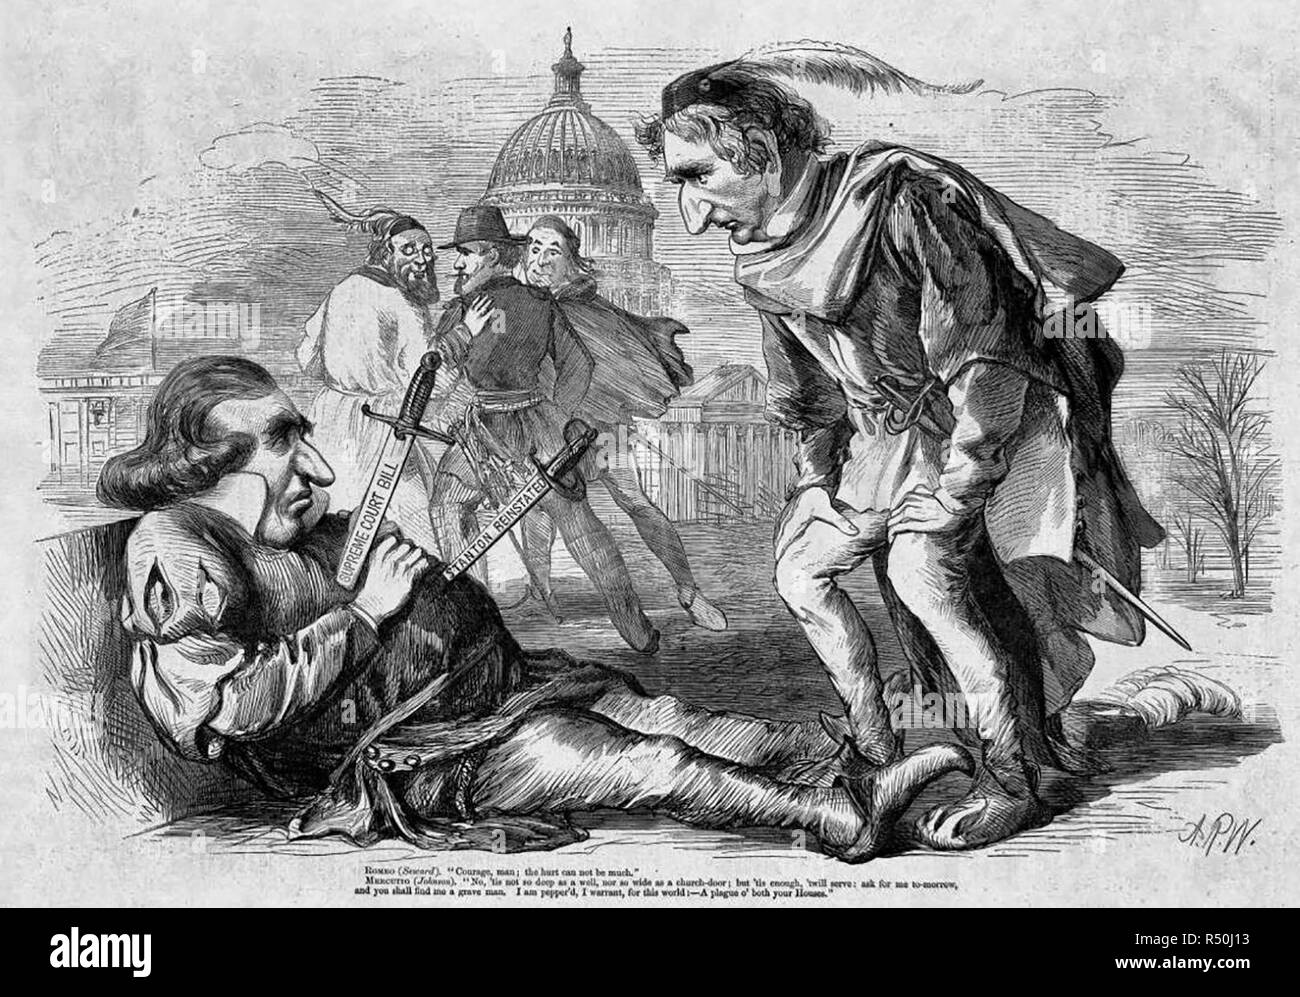 Andrew Johnson (left) as Mercutio wishes a plague on both Houses of Congress as Romeo (William H. Seward) leans over him. Political Cartoon, 1868 Stock Photo